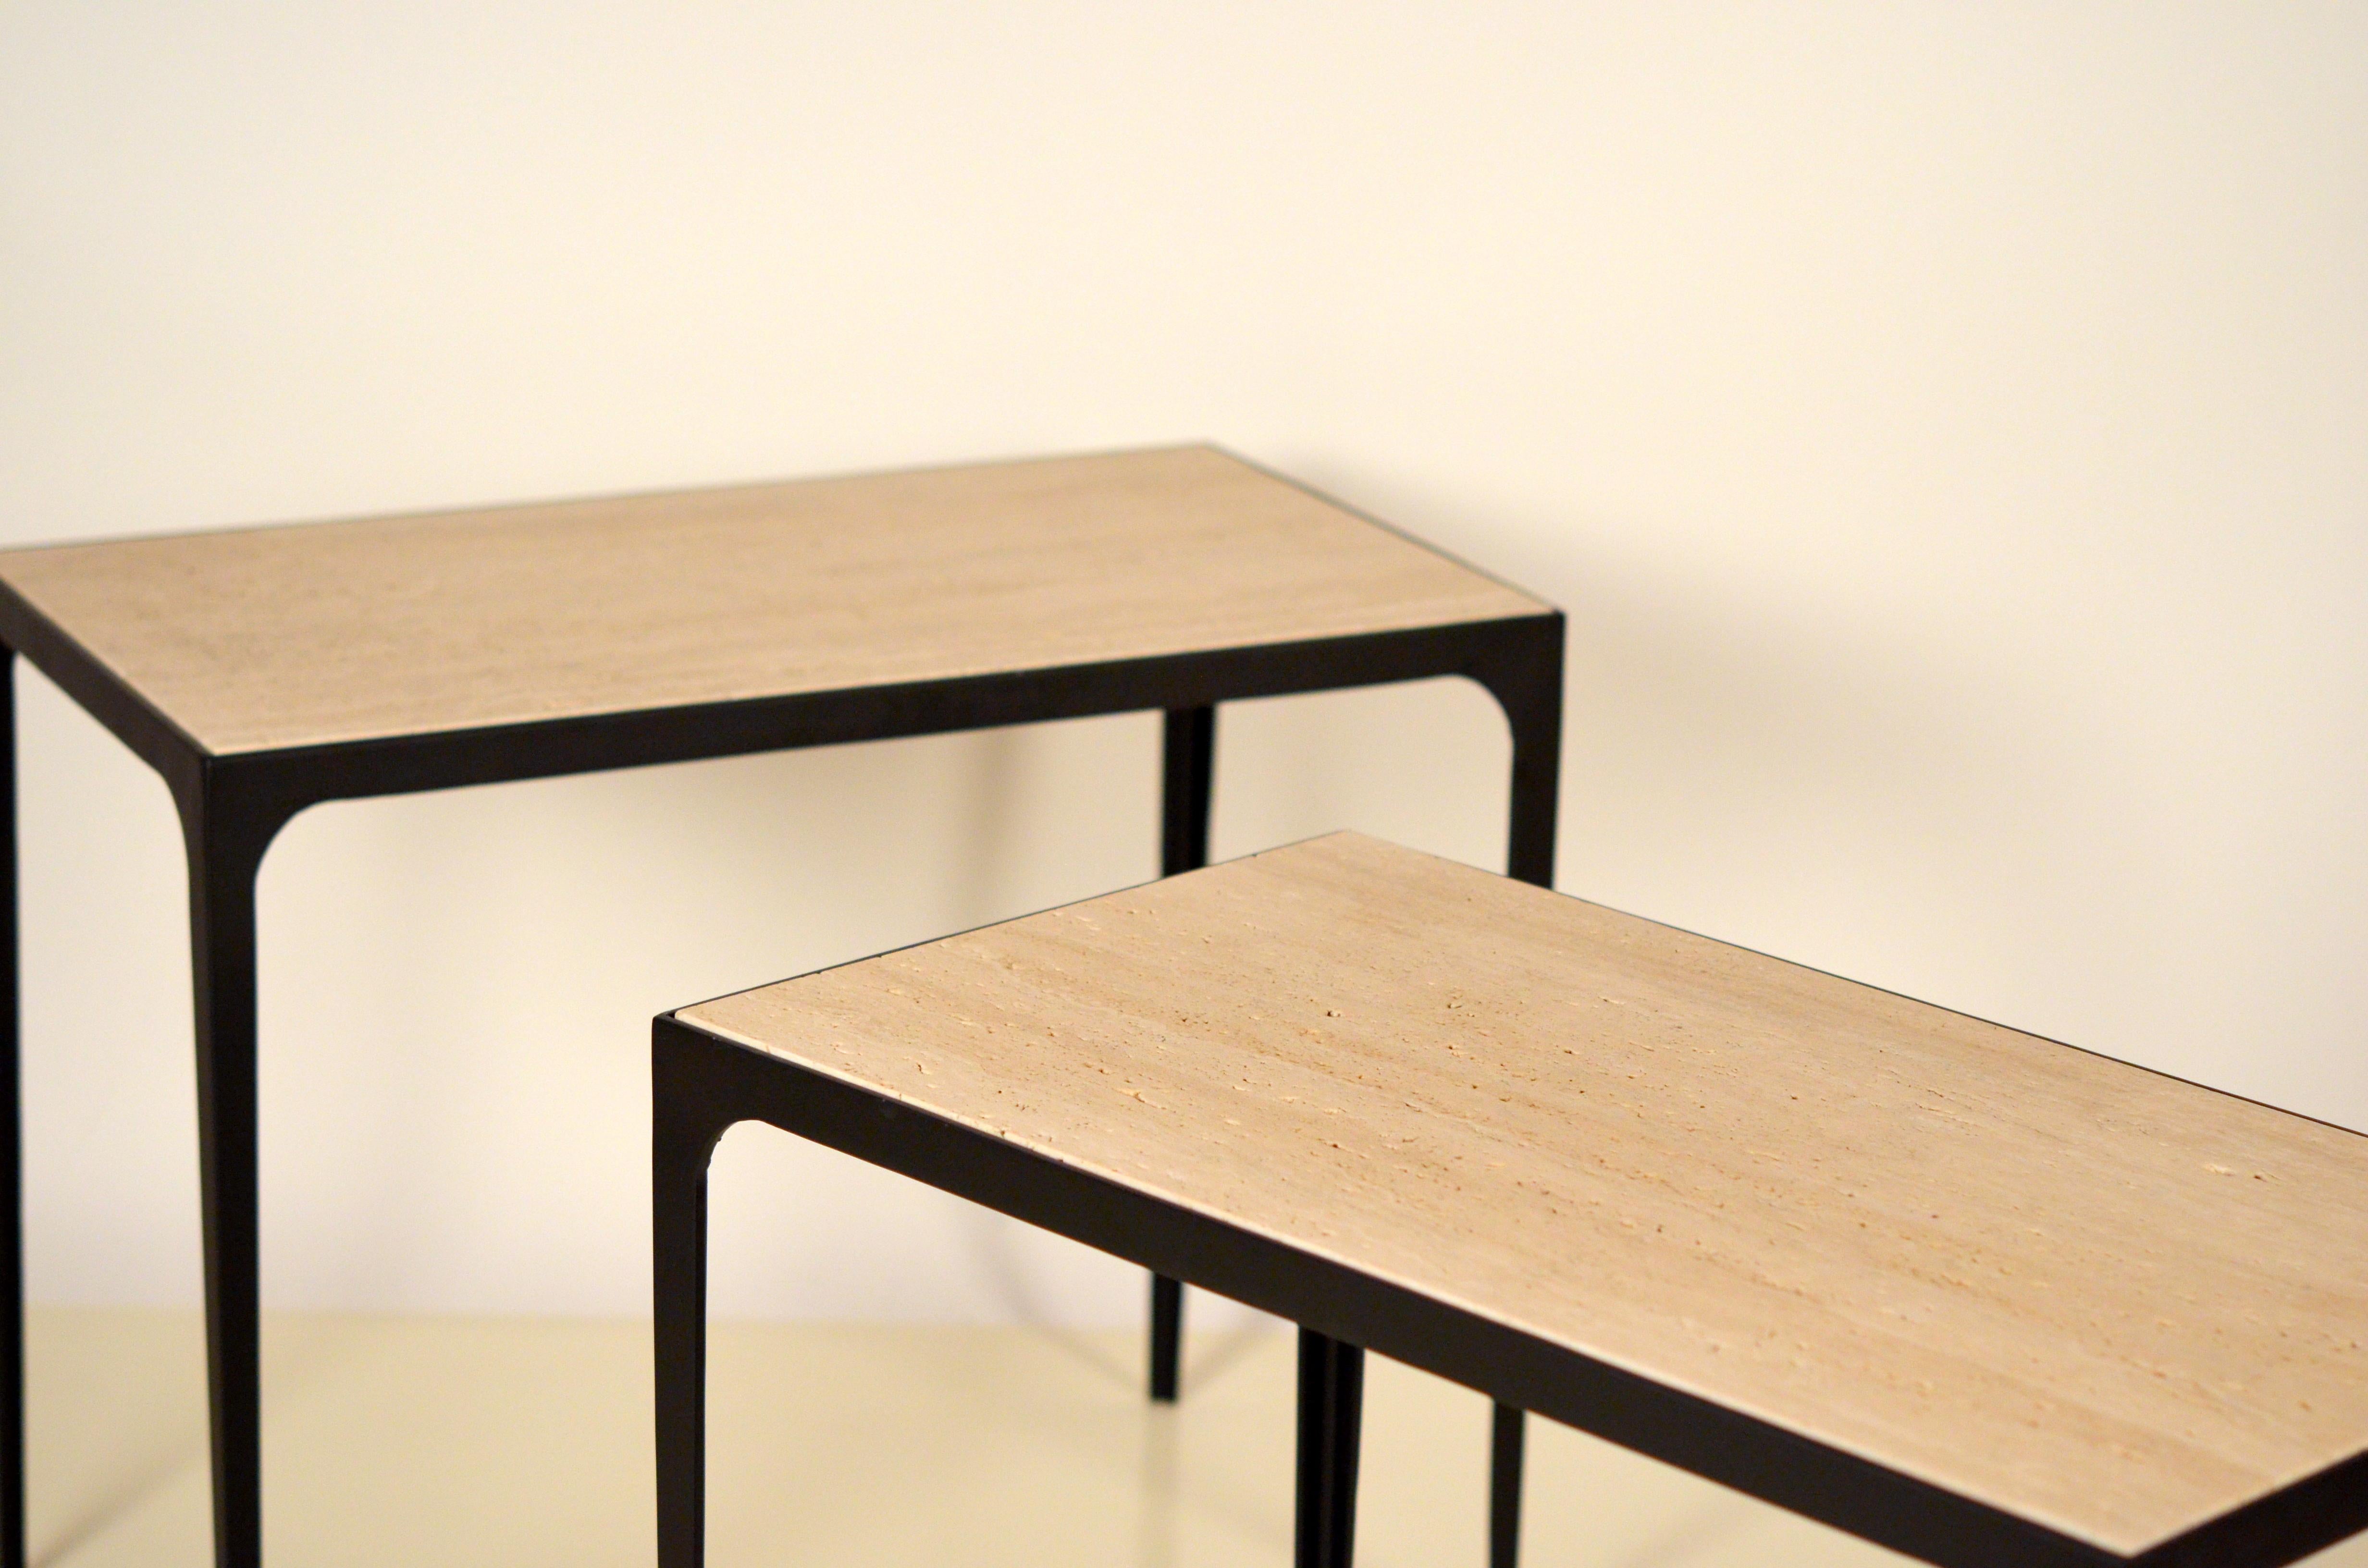 Pair of Chic 'Esquisse' Grooved Ivory Travertine Side Tables by Design Frères In New Condition For Sale In Los Angeles, CA